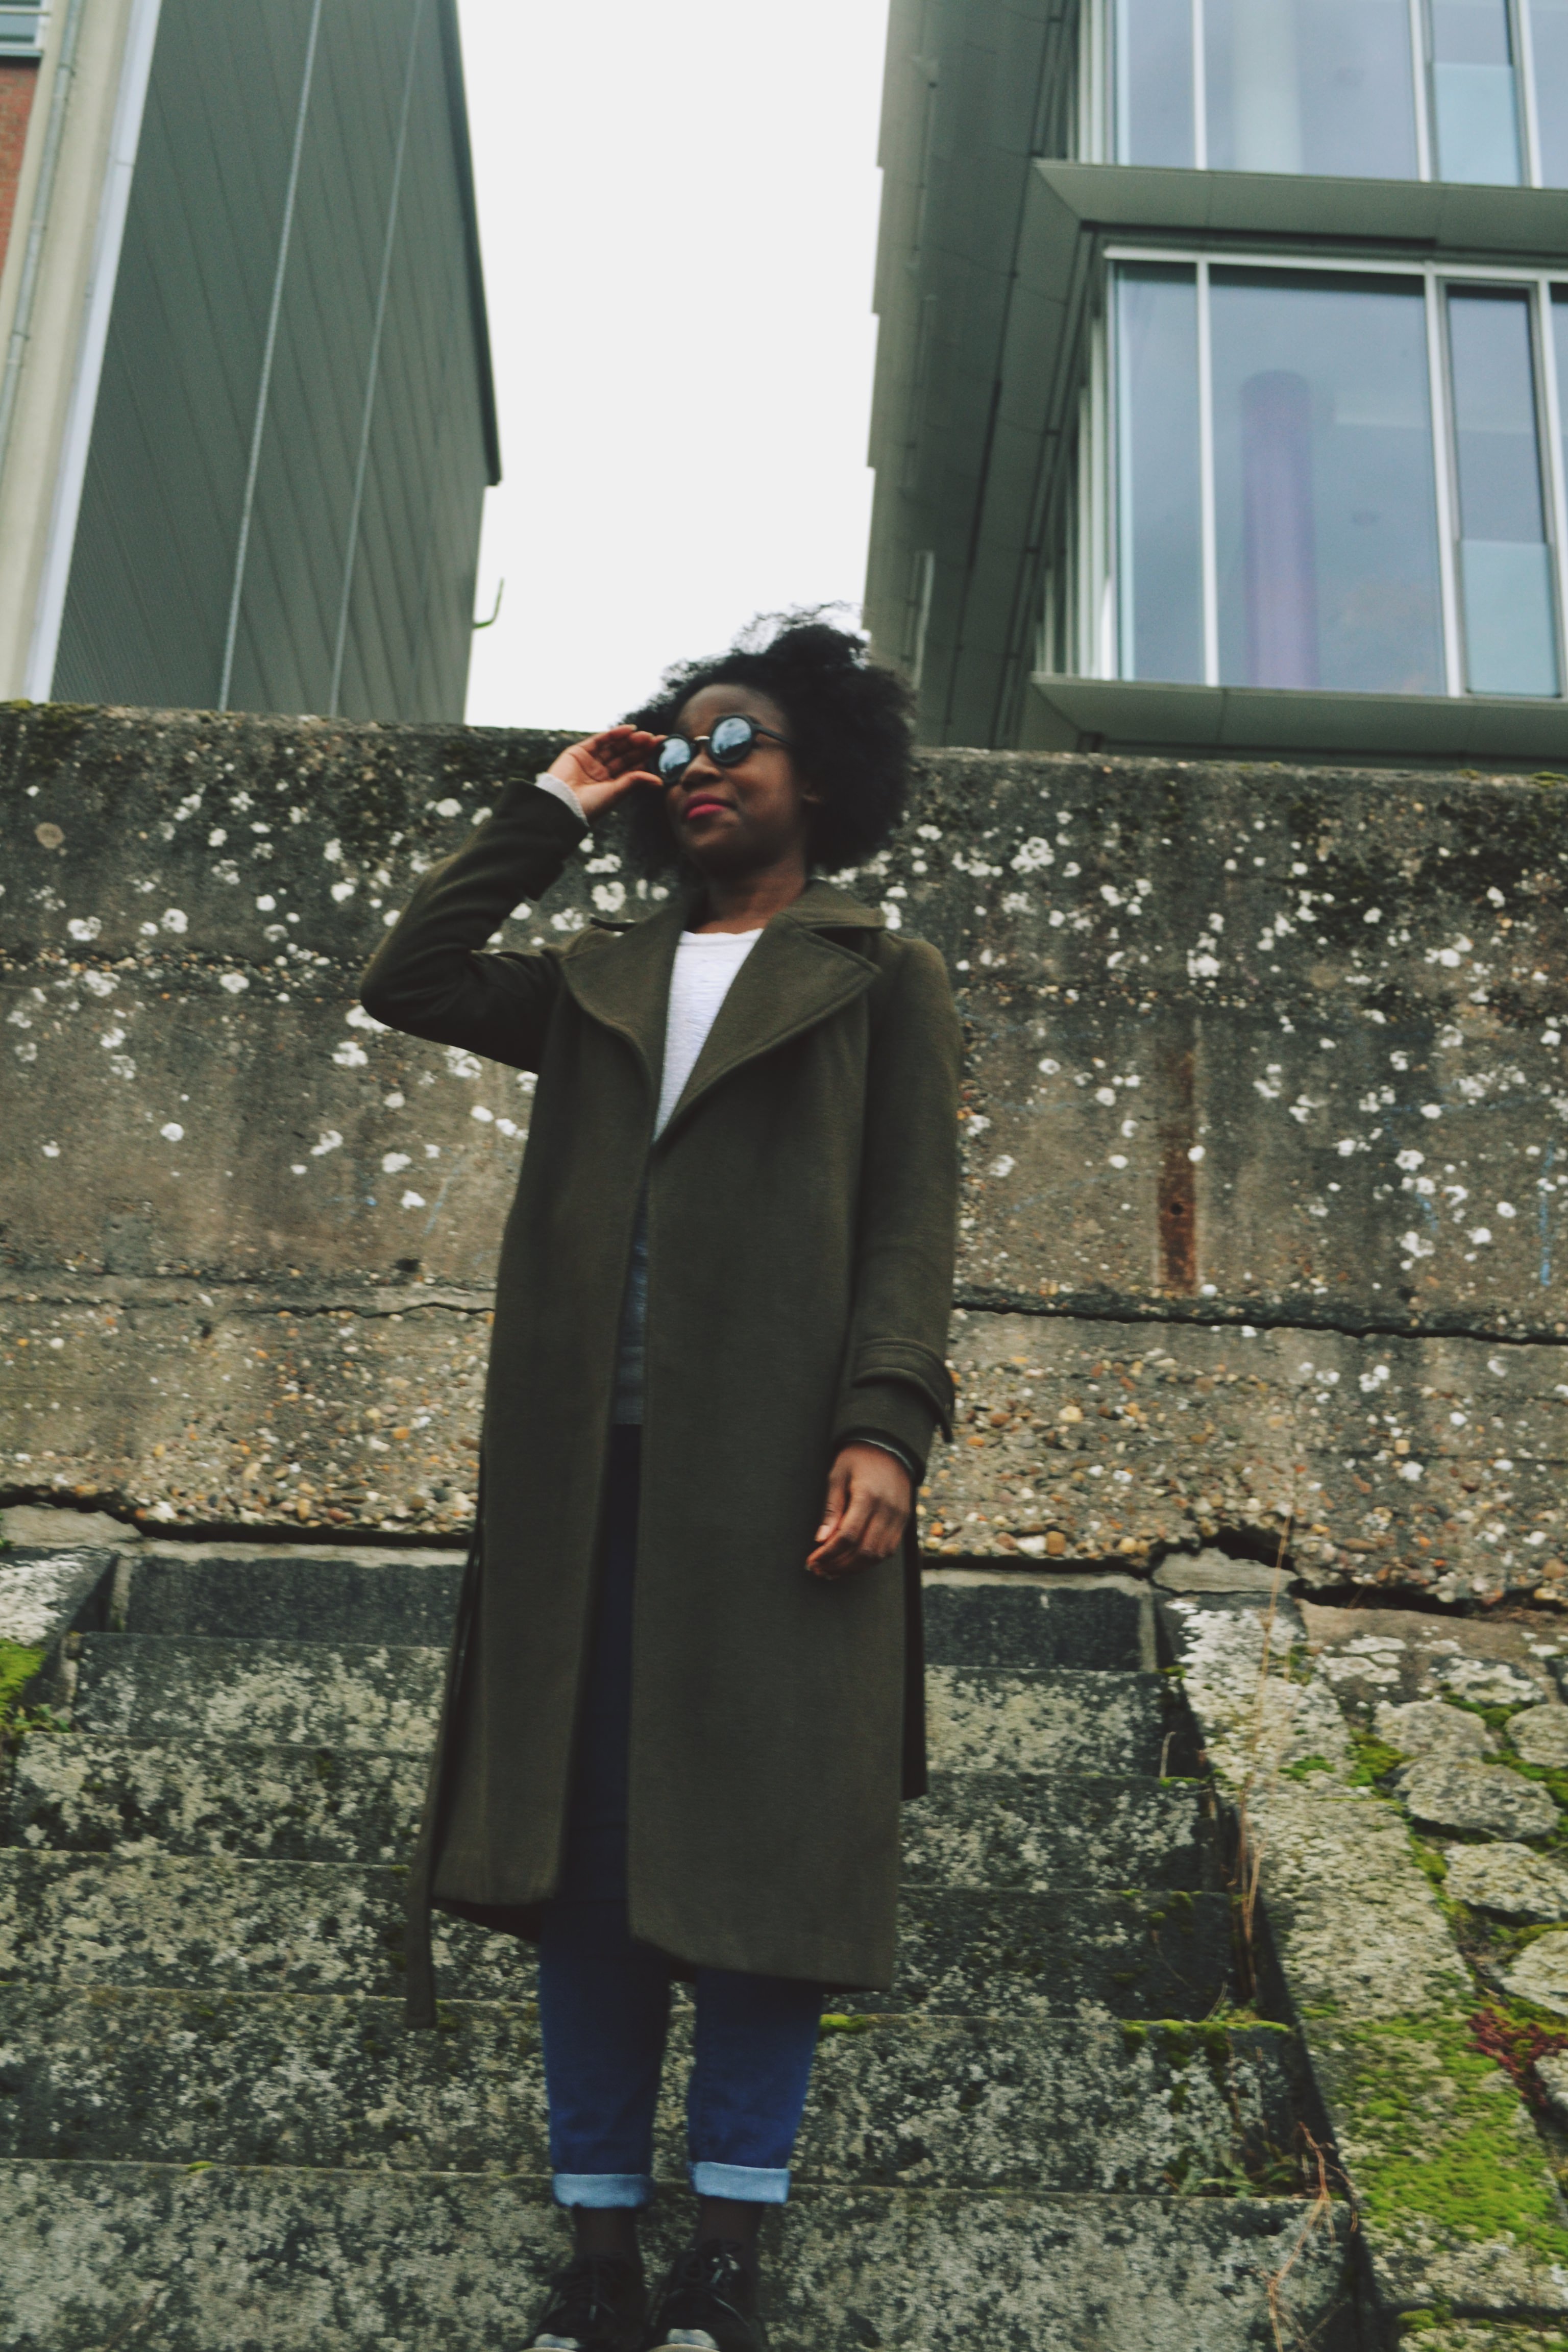 A woman with an afro is touching her sunglasses and smirks, looking off into the distance. She is wearing a khaki longline coat and jeans.